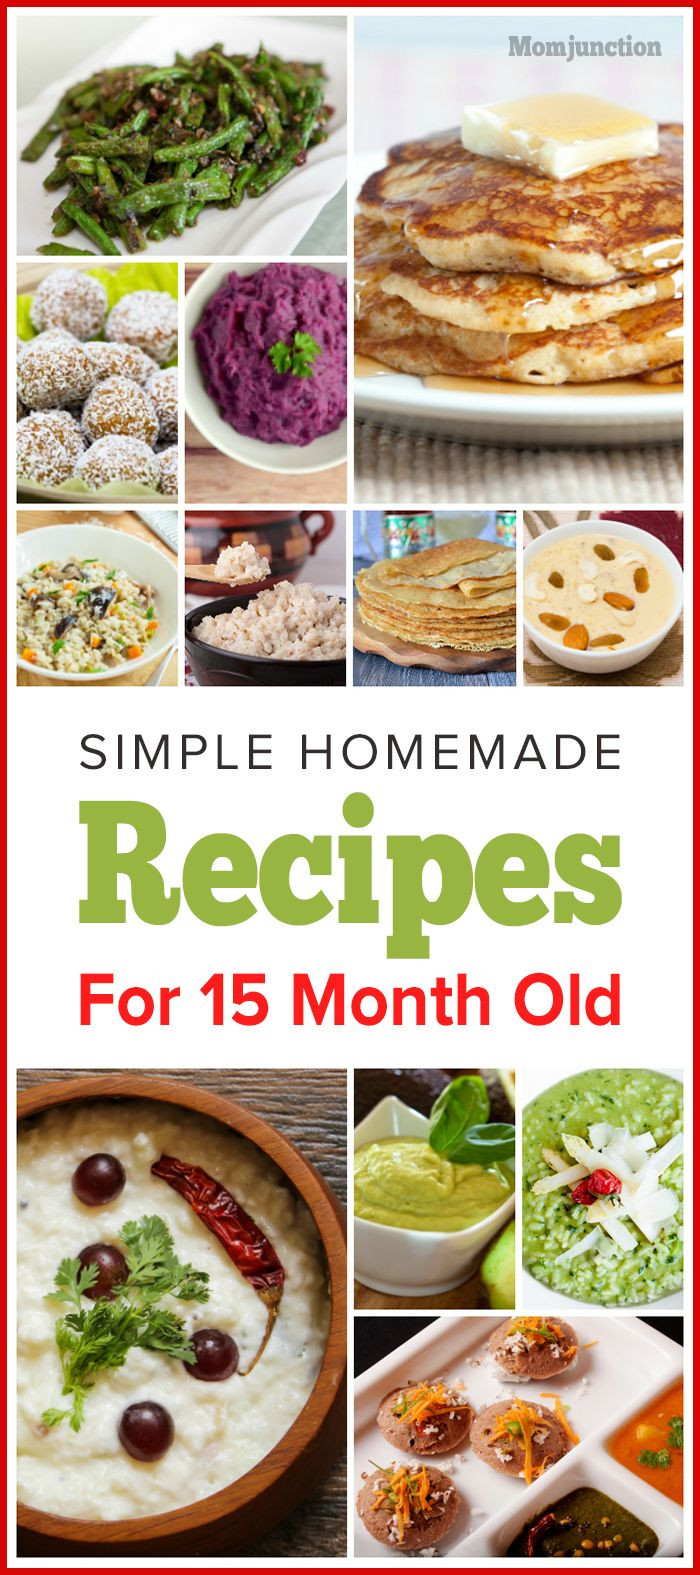 12 Month Old Baby Food Recipes
 Healthy And Interesting Food Ideas For 15 Month Olds